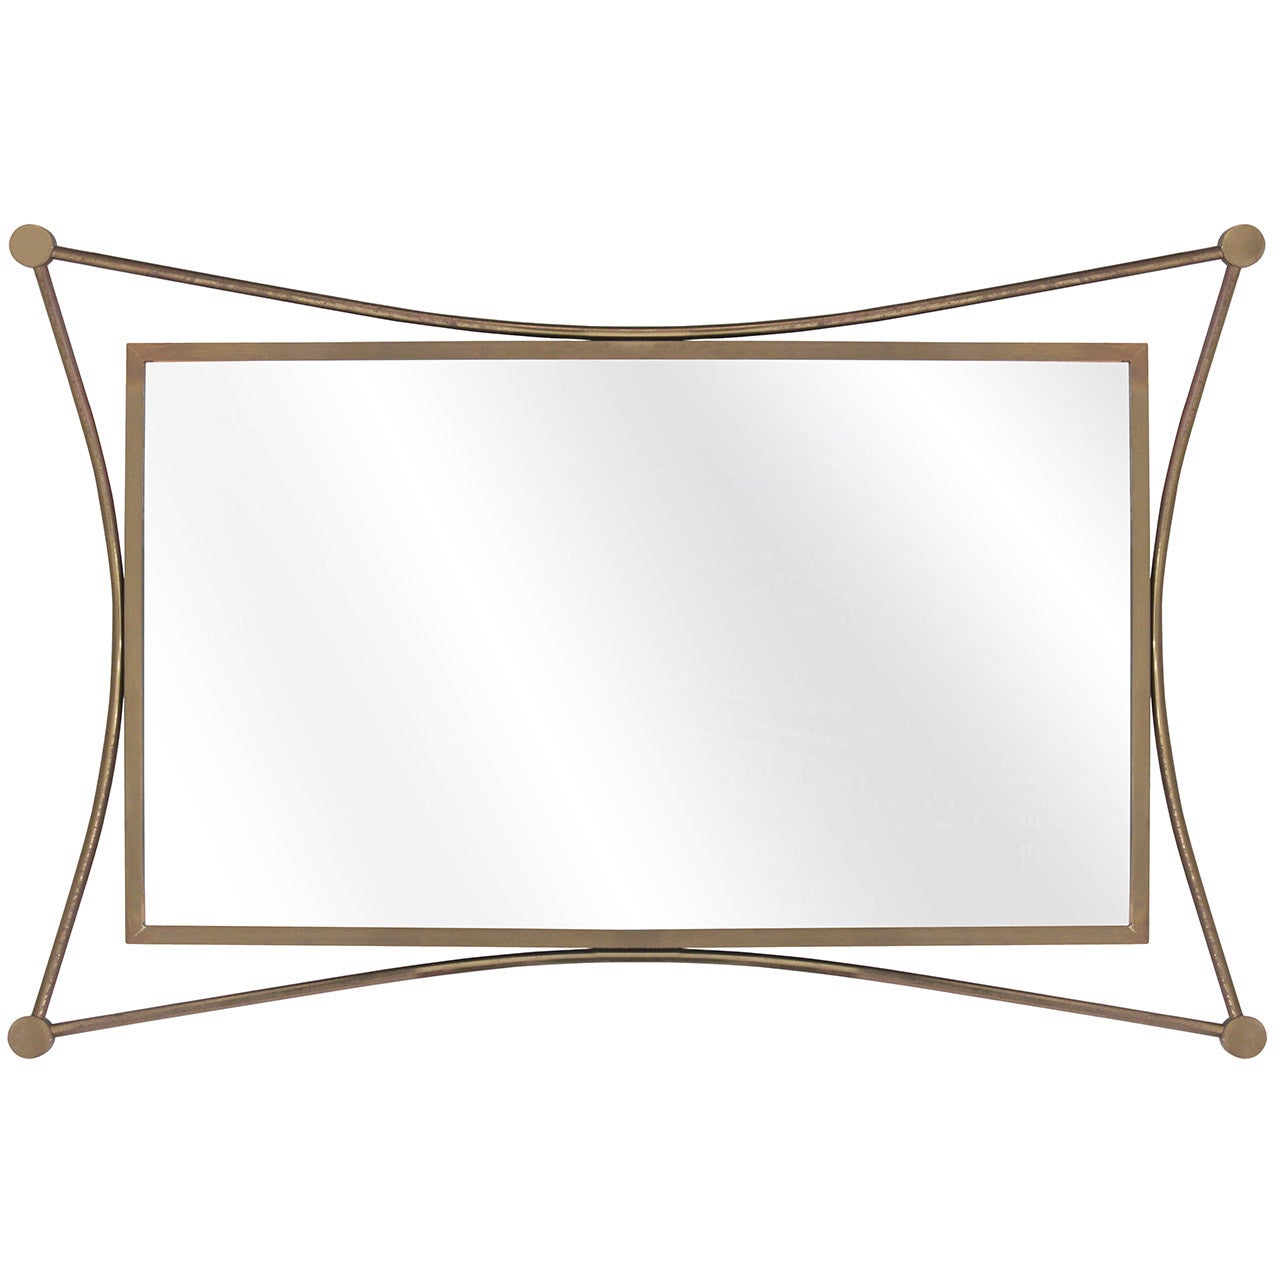 Atomic Style Rectangular Mirror with Frame in Brass